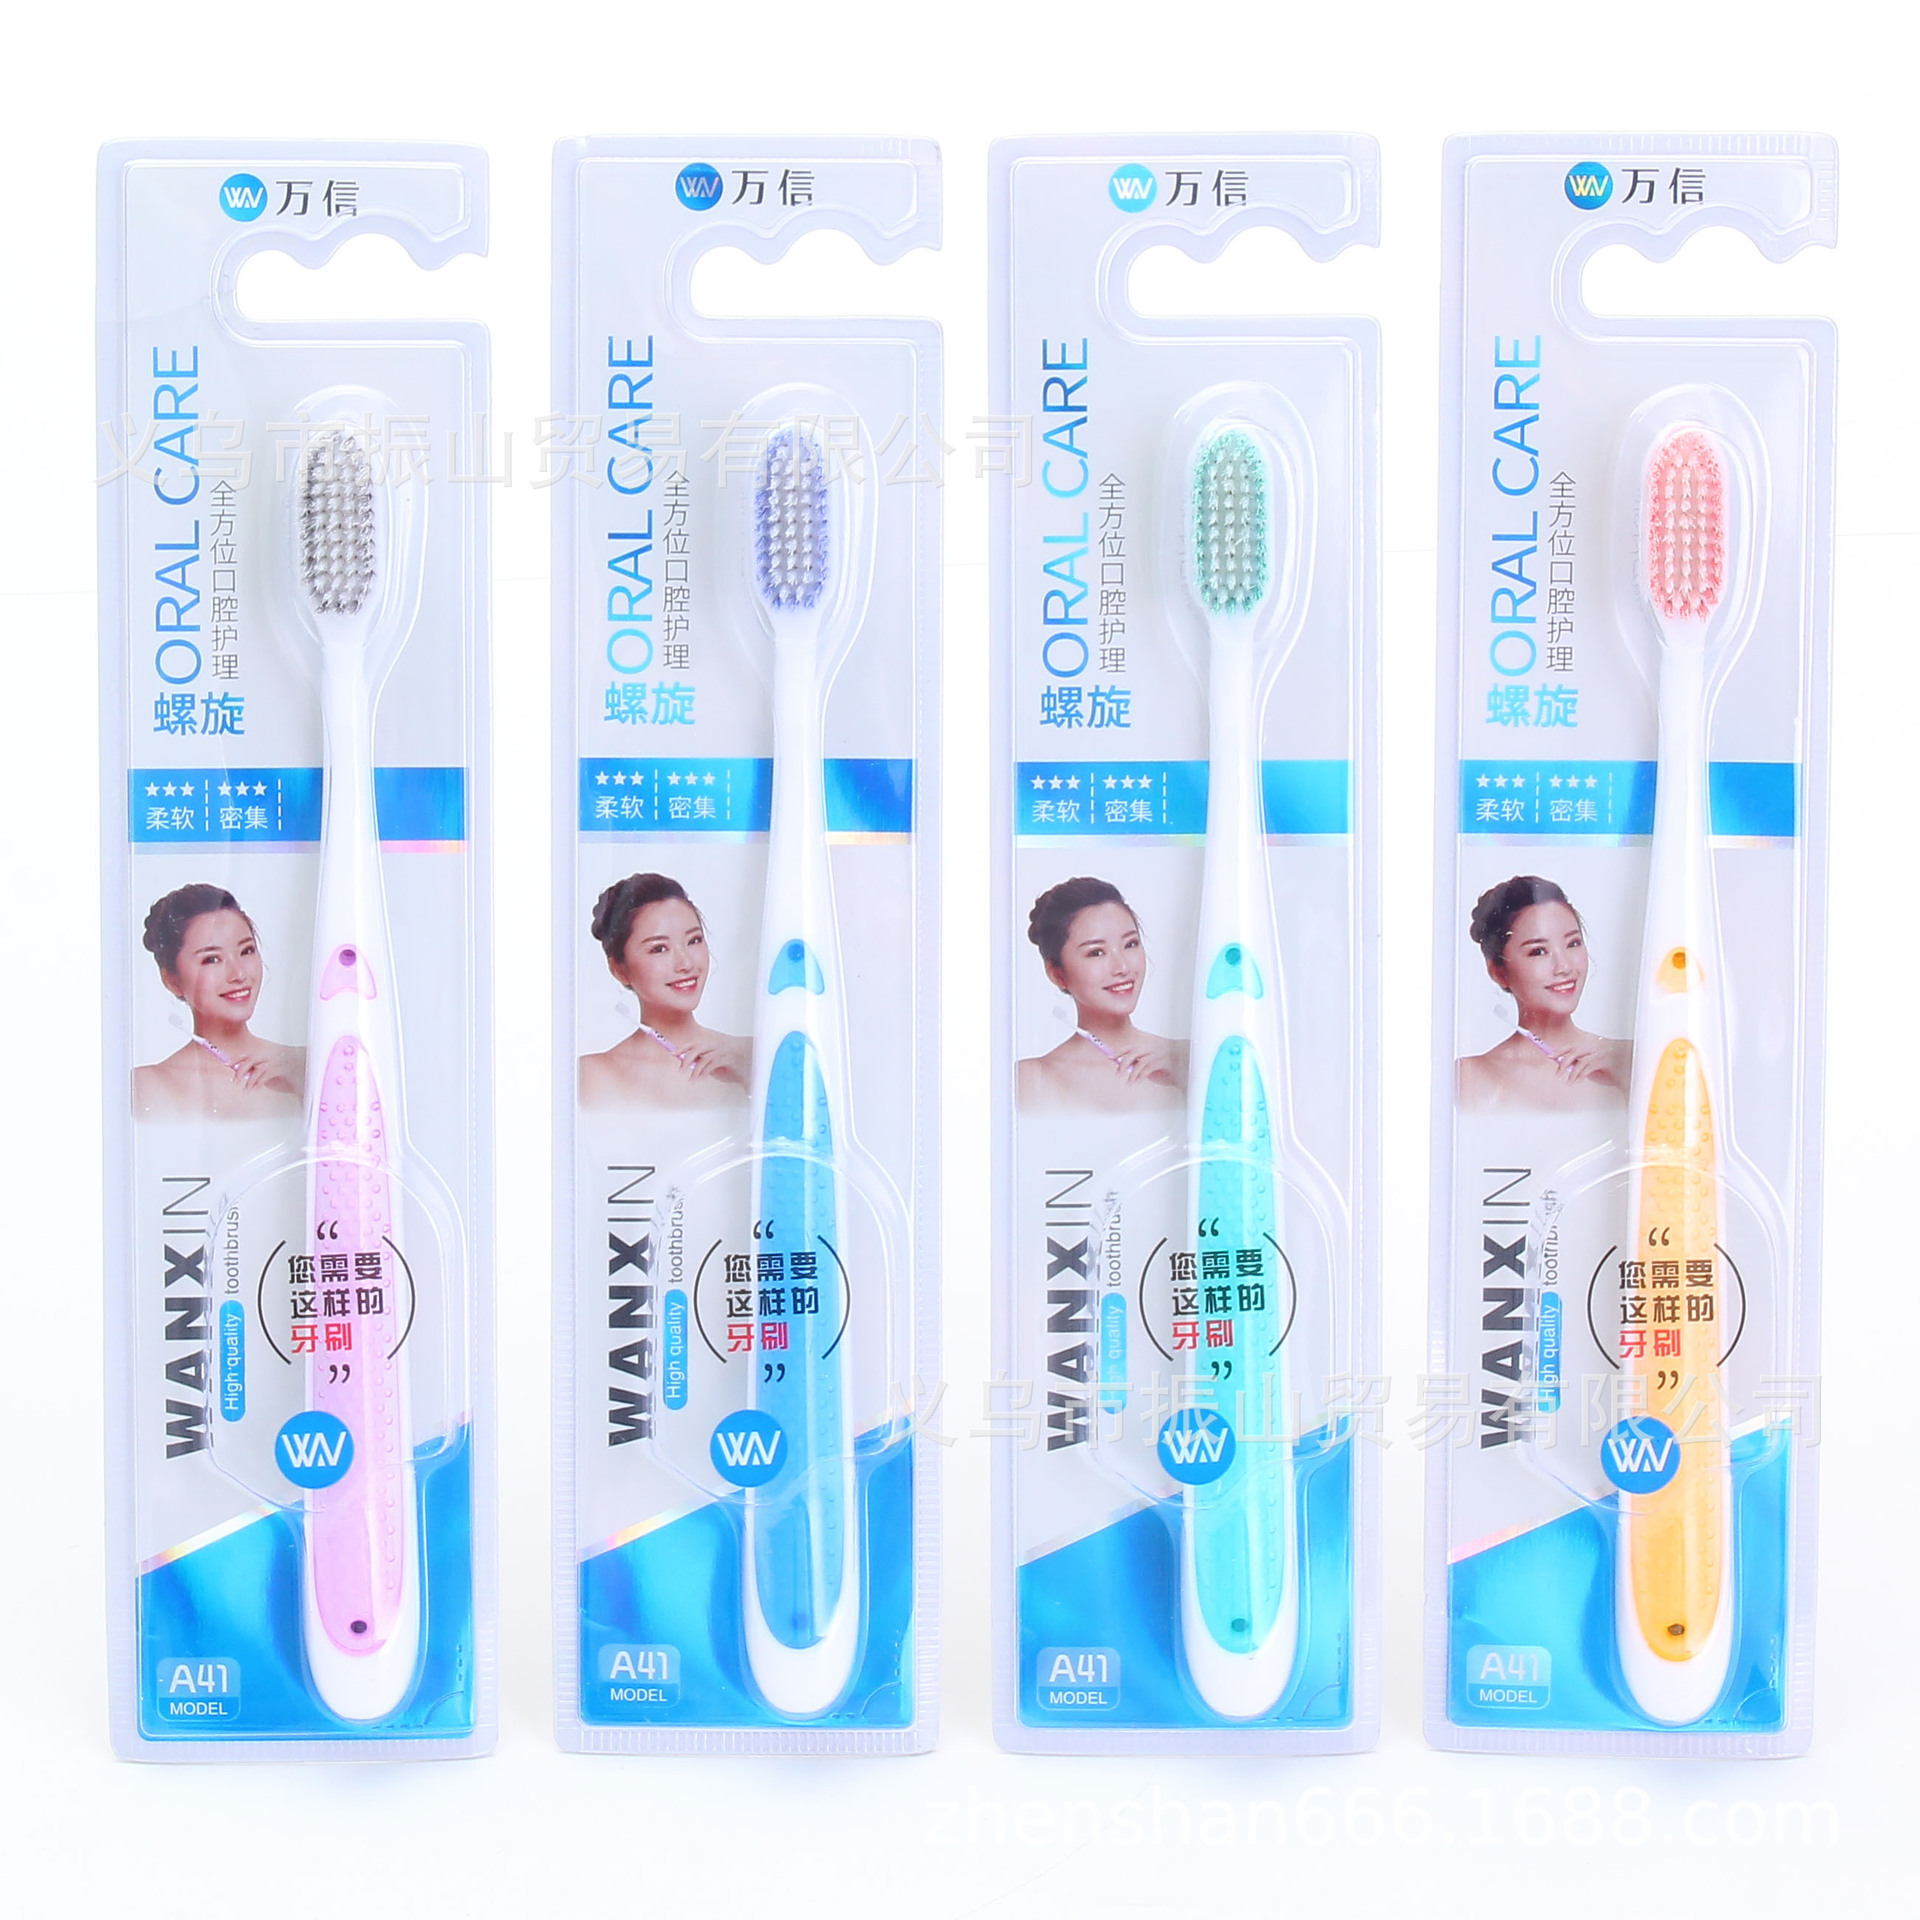 wanxin a41 craftsmanship all-round oral care intensive soft spiral wire soft bristle toothbrush